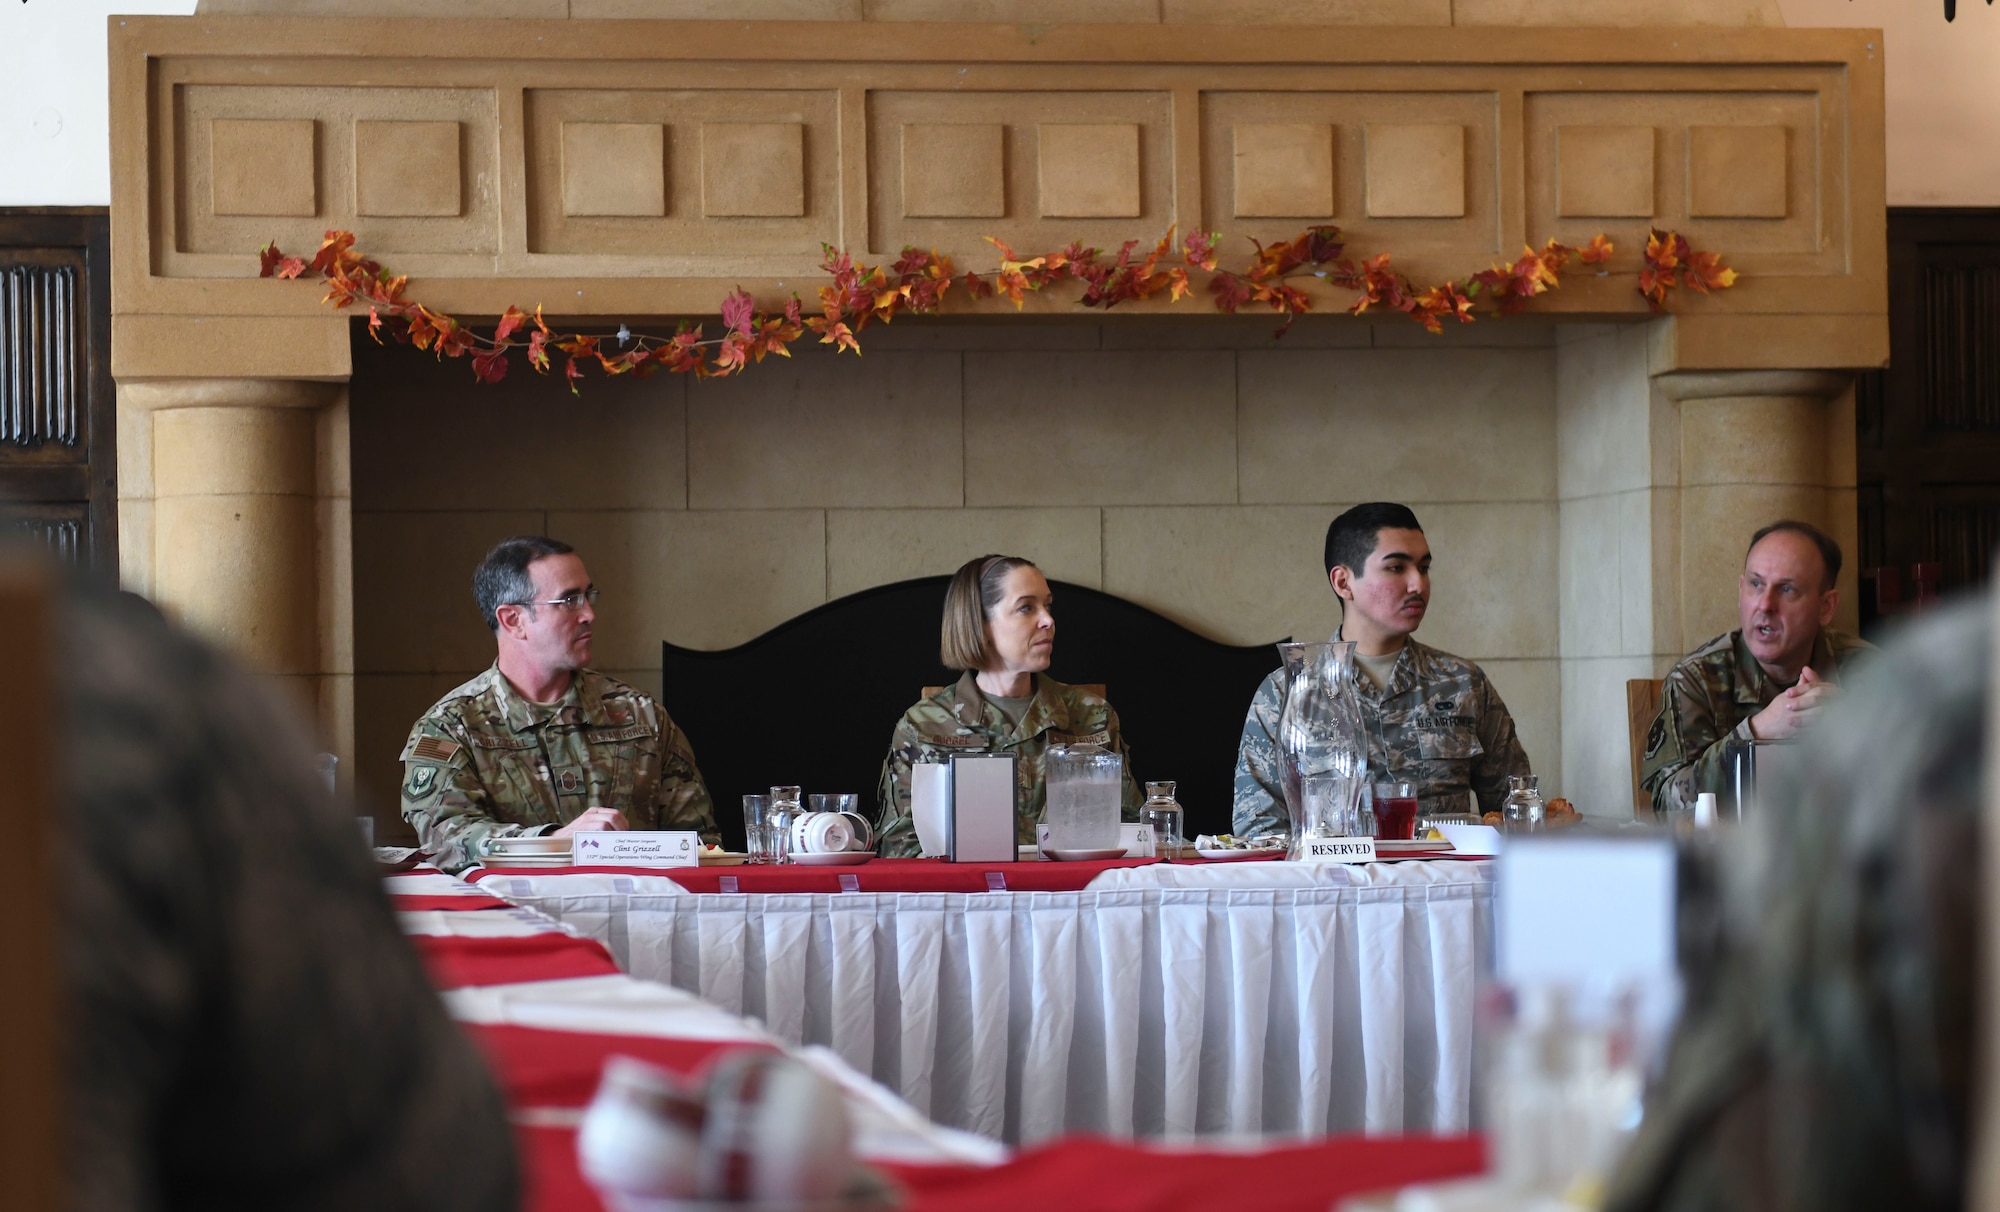 U.S. Air Force Air Education and Training Command command chiefs speak with first-term and newly retrained Airman during lunch to learn their perspective of the training process at RAF Mildenhall, England, Nov. 14, 2018. The purpose of their visit was to speak with Airmen and gain a better understanding of what they do to support Team Mildenhall, AETC and Air Force Special Operations Command. (U.S. Air Force photo by Airman 1st Class Alexandria Lee)